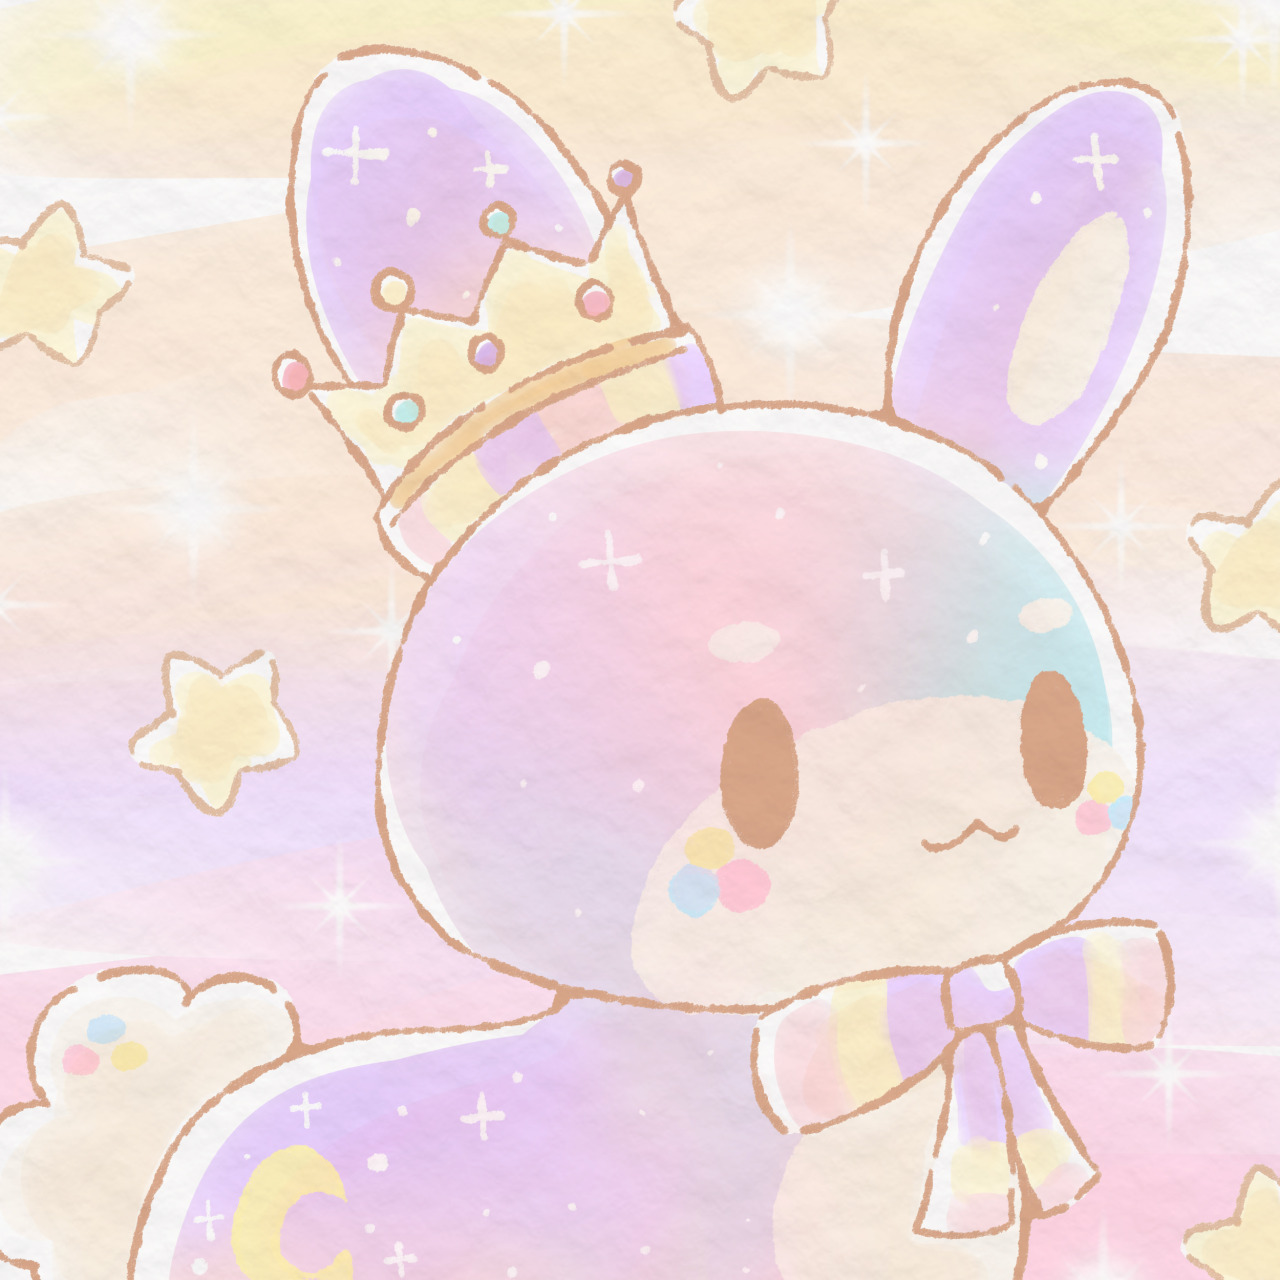 𝑑𝑟𝑒𝑎𝑚 𝑝𝑜𝑙𝑙𝑒𝑛 — sanrio wallpapers from last year